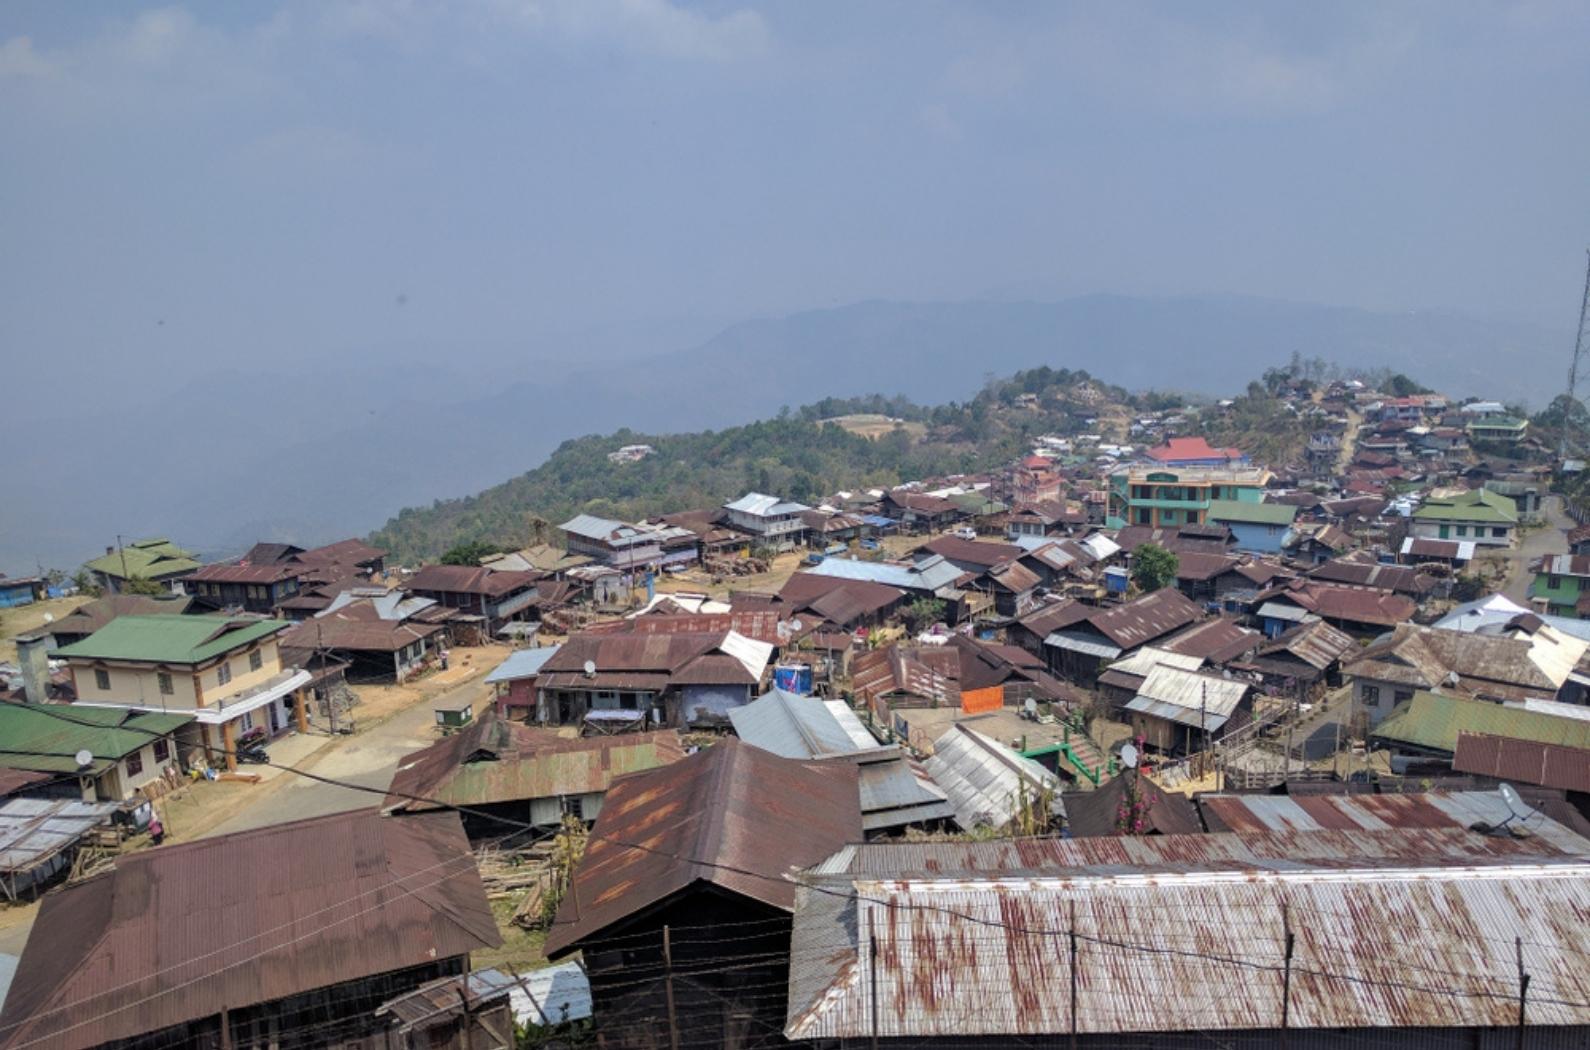 A panoramic view of the village of Ungma, Nagaland.